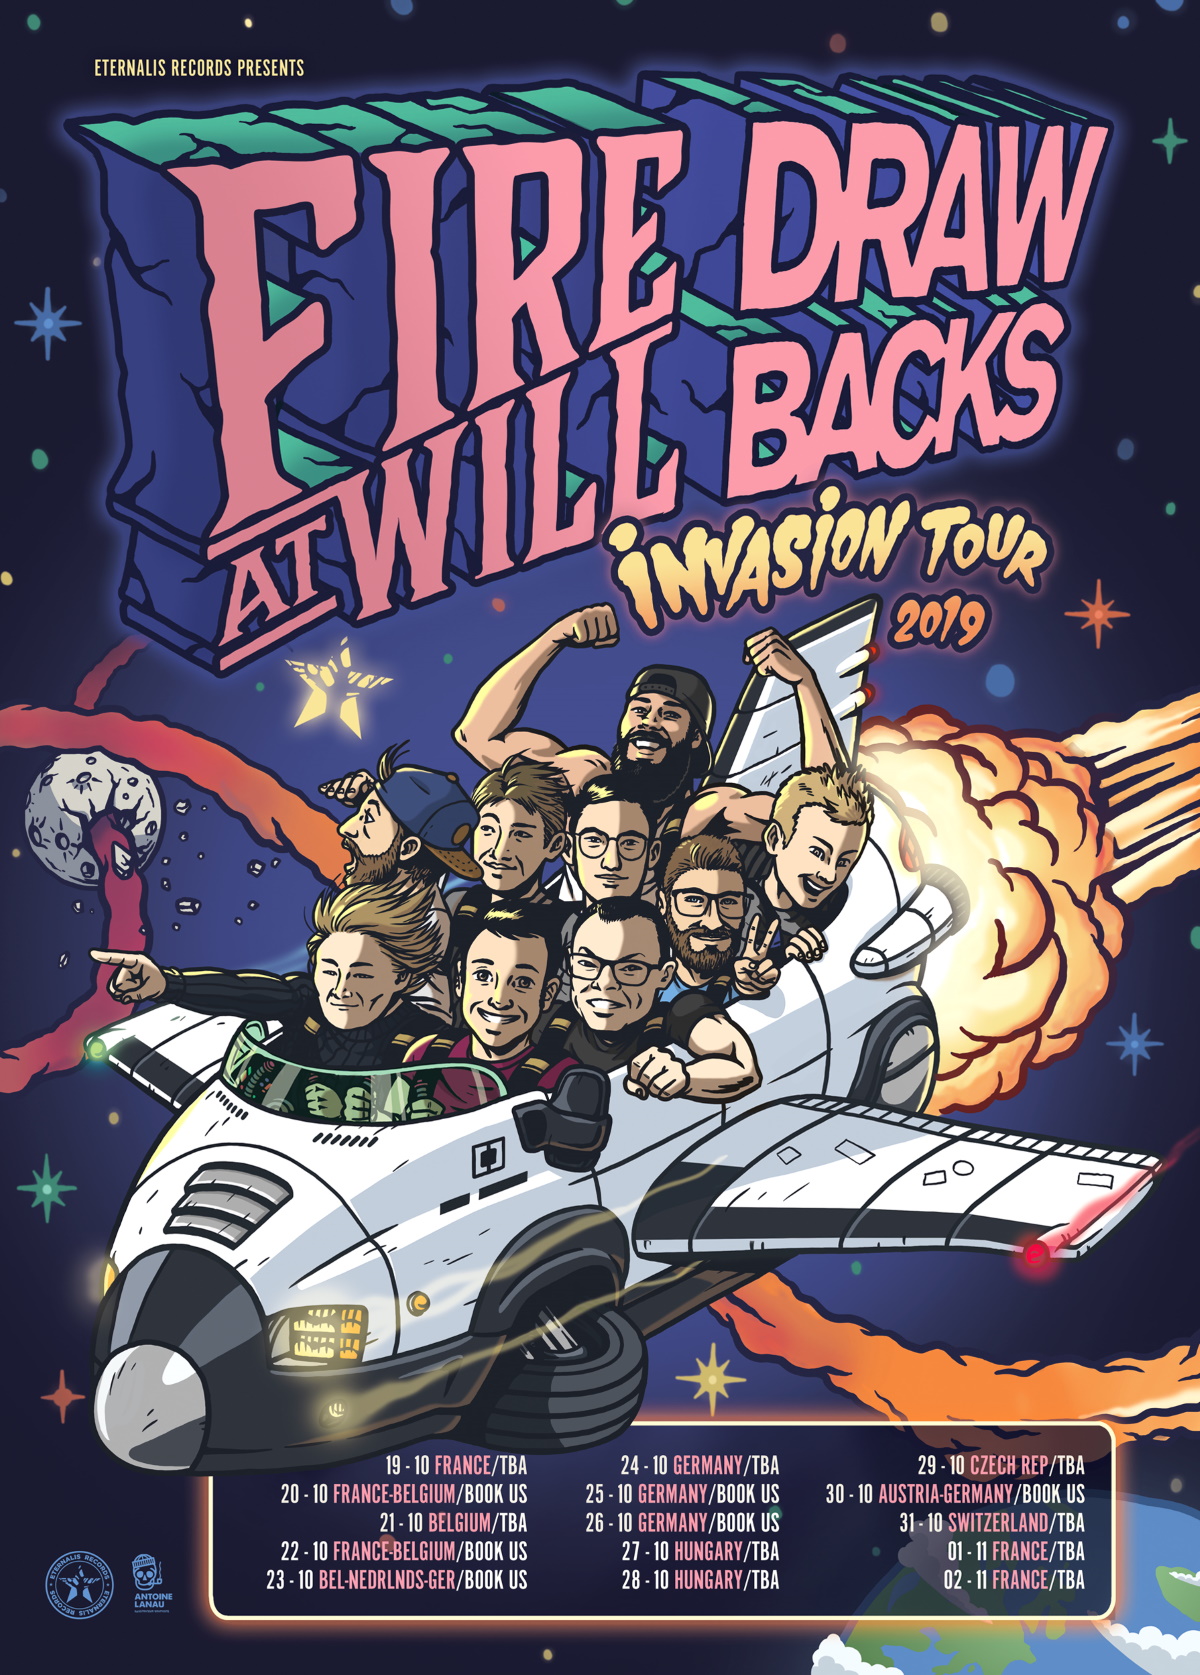 FIRE AT WILL and DRAWBACKS tour